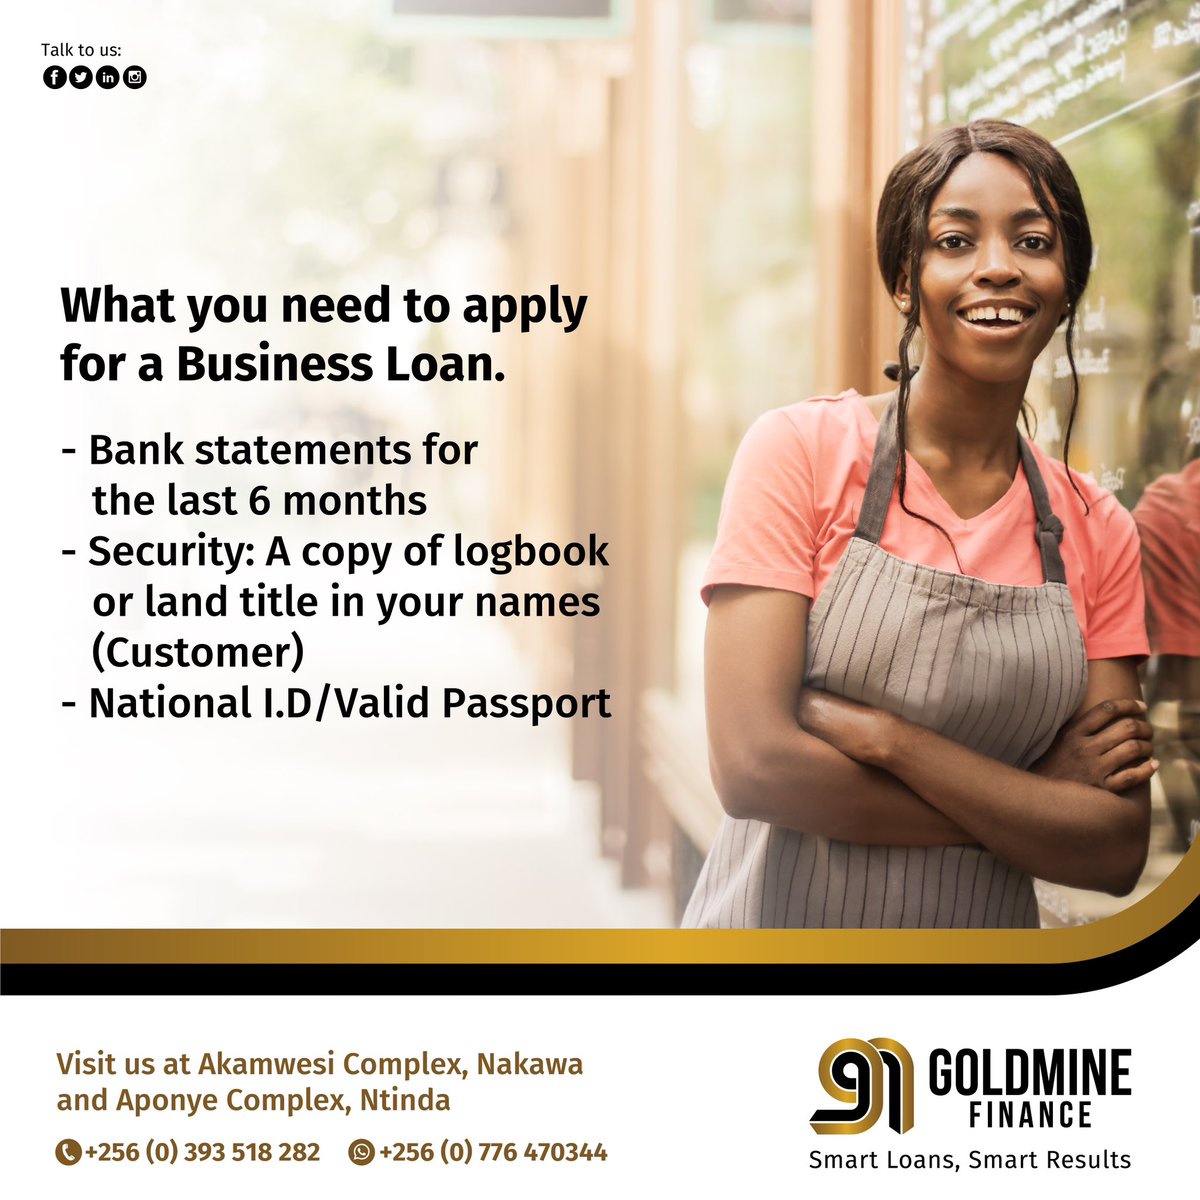 If you're interested in a #BusinessLoan for your business, here's what we require as you visit our offices. 

#GoldmineFinance #SmartGoalsSmartResults